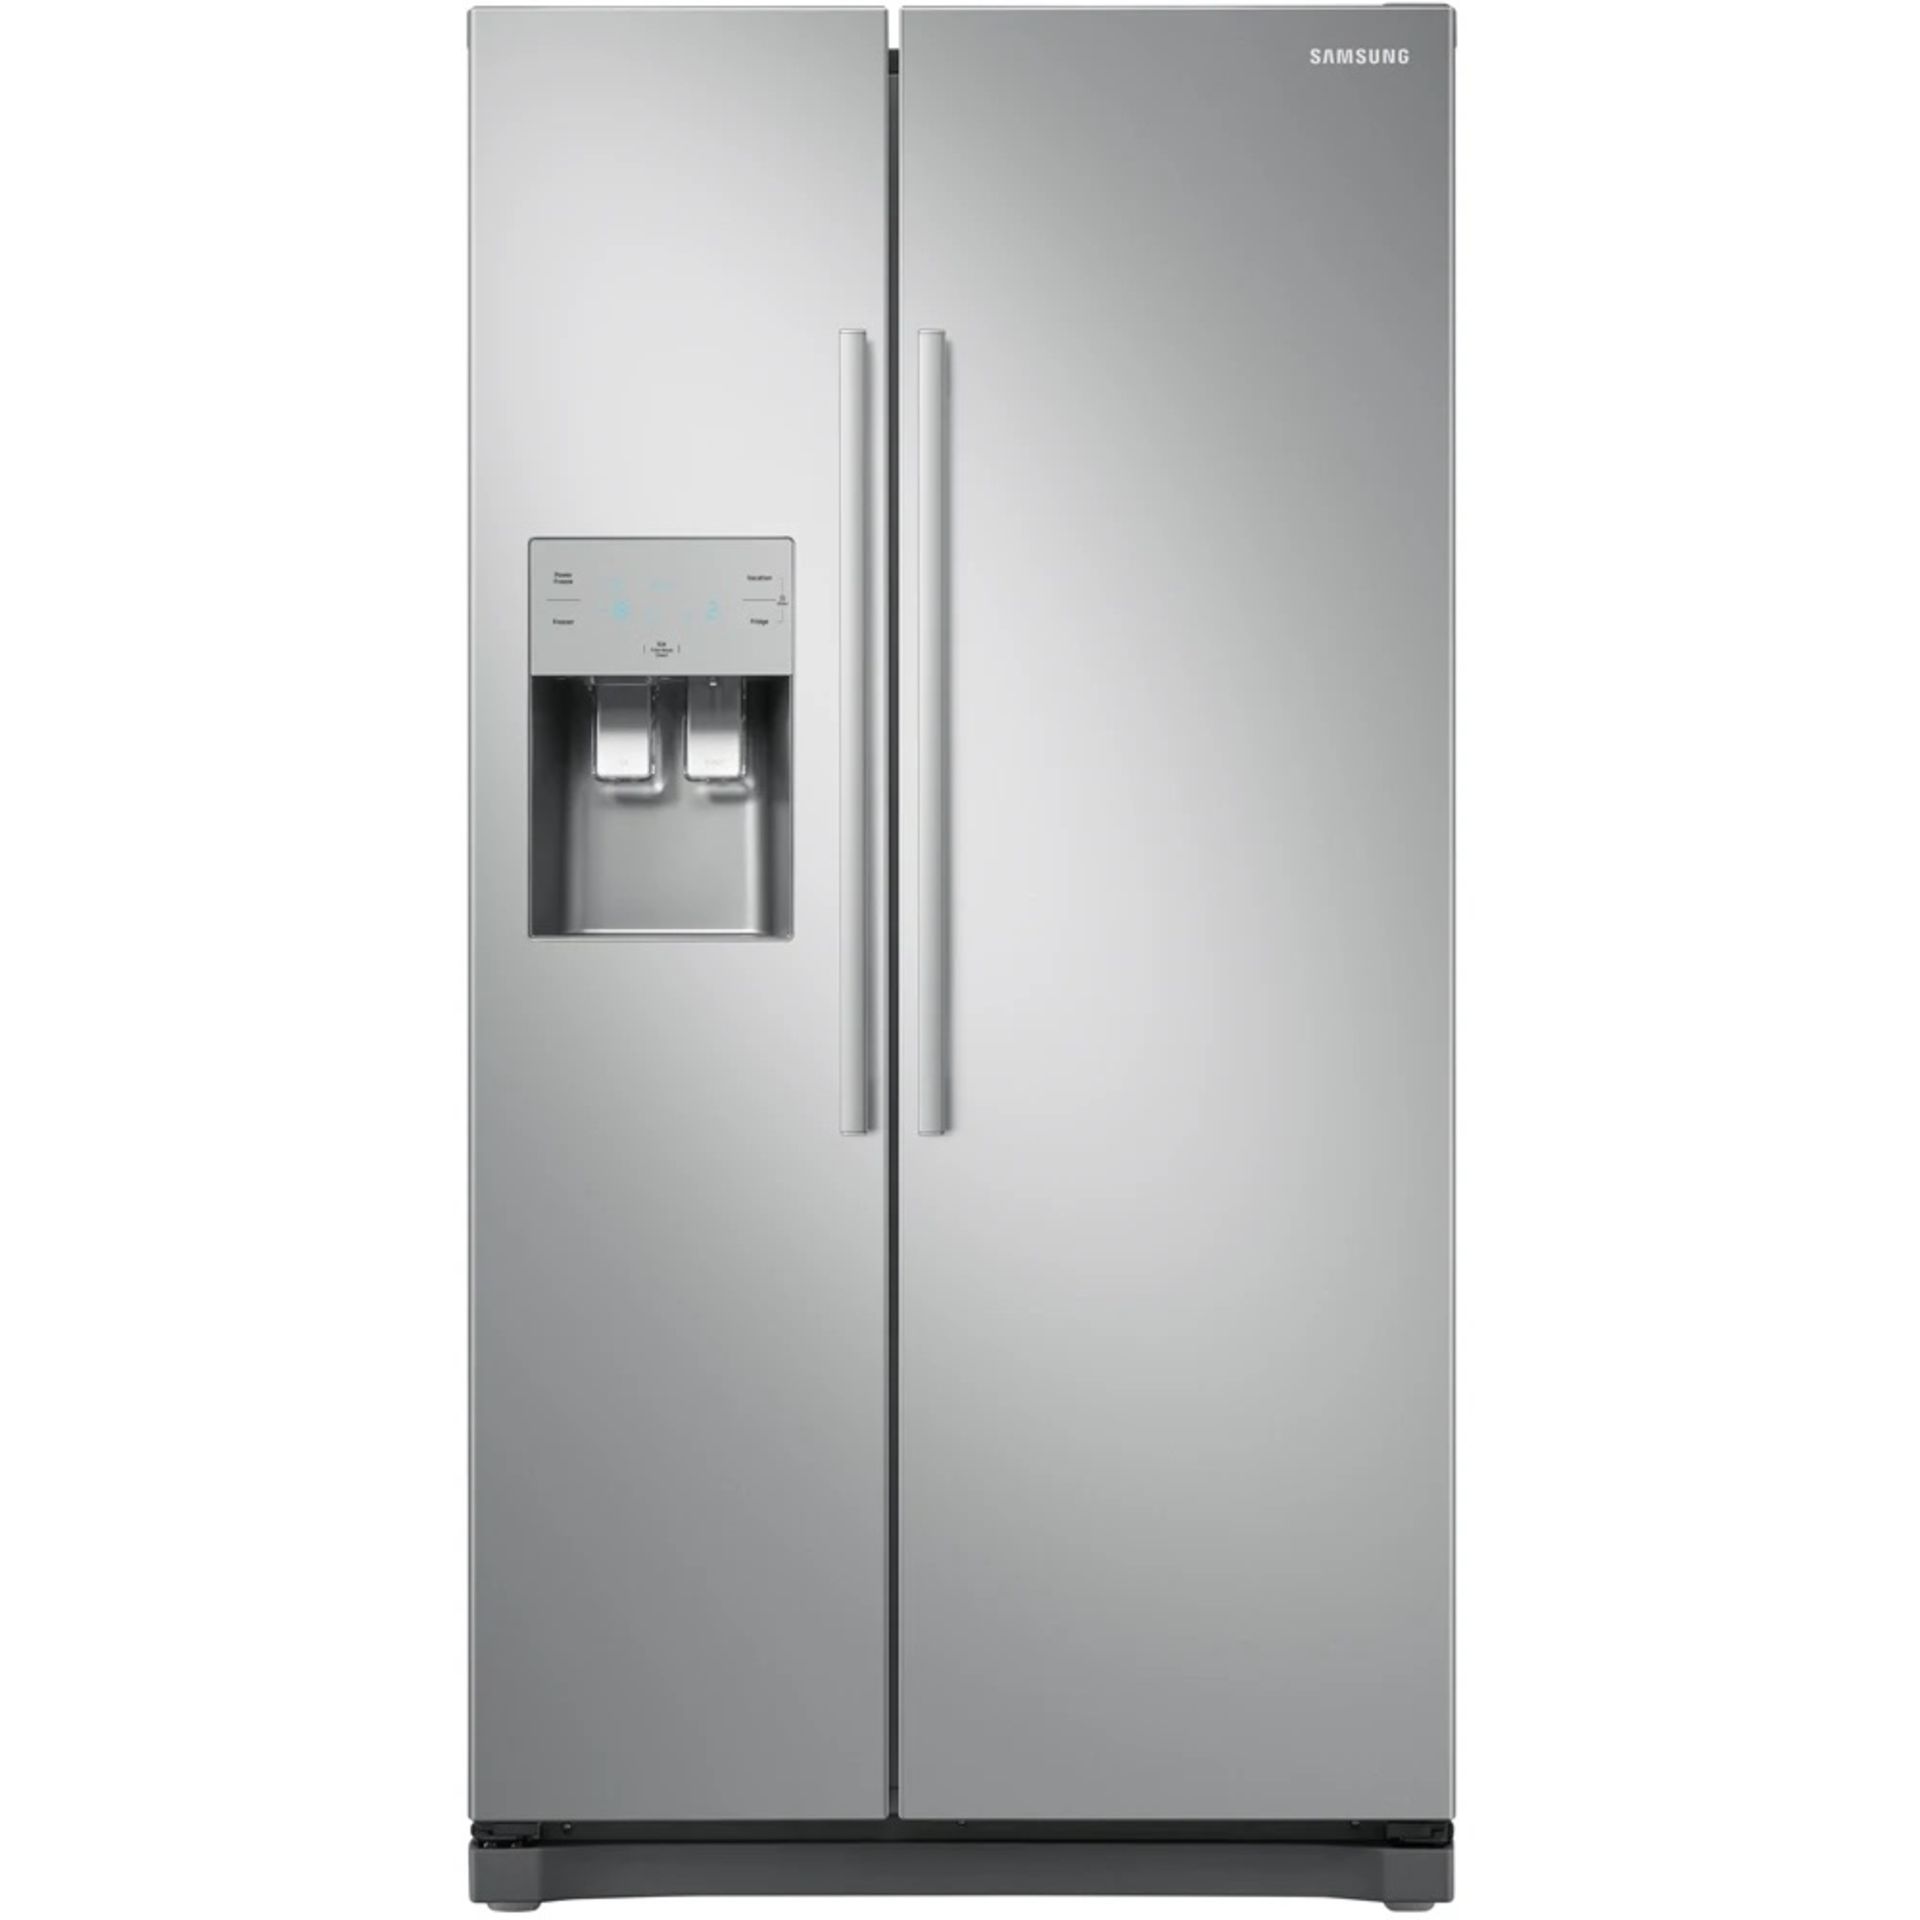 Samsung RS50N3513S8 American style fridge freezer, tested working for coldness but the water